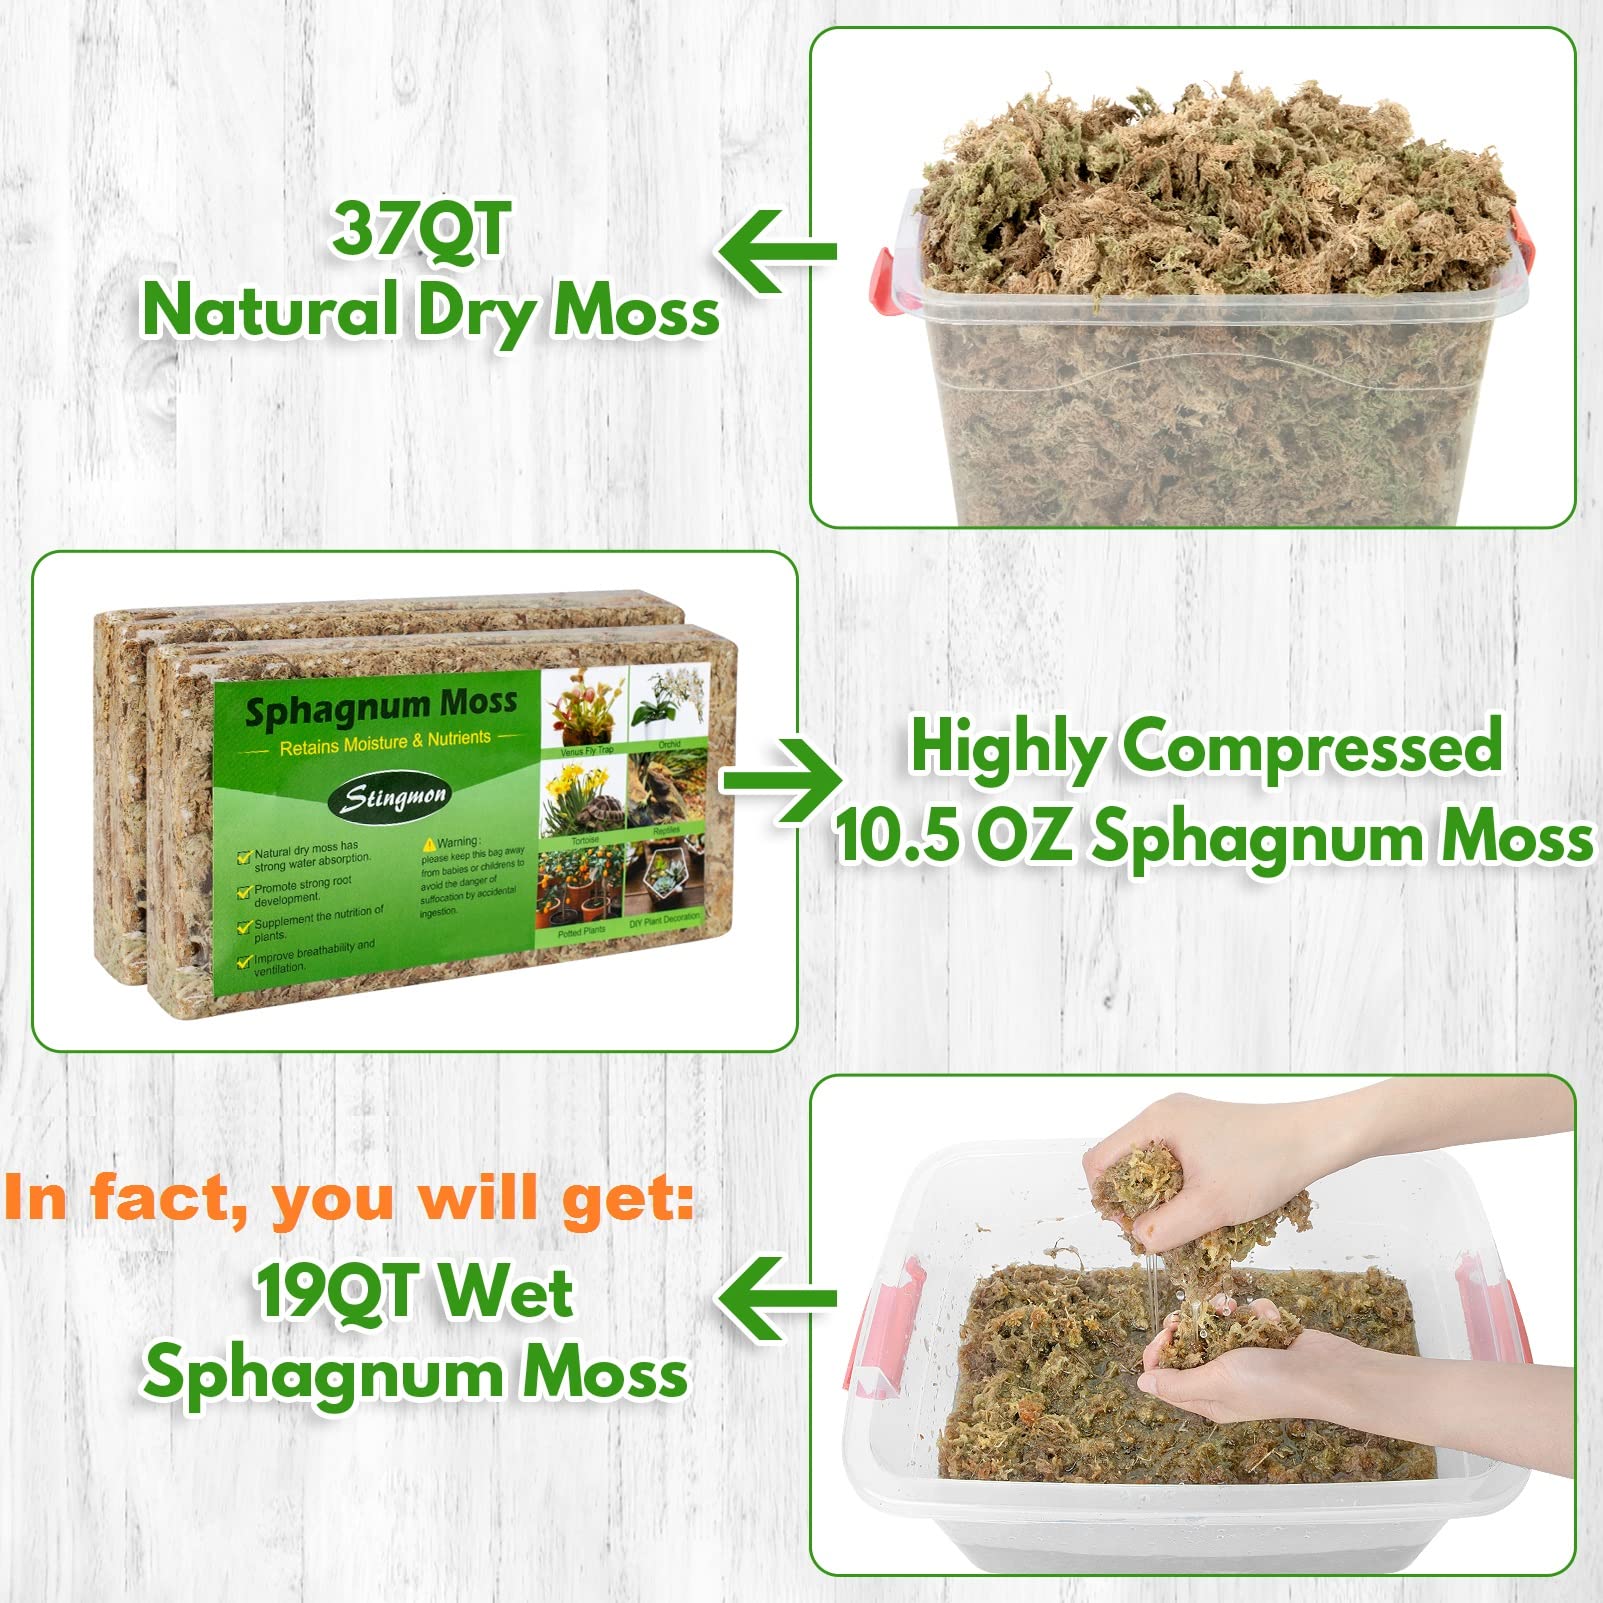 Stingmon 37QT Sphagnum Moss for Plants Sphagnum Moss for Reptiles, 10.5OZ  Natural Orchid Moss for